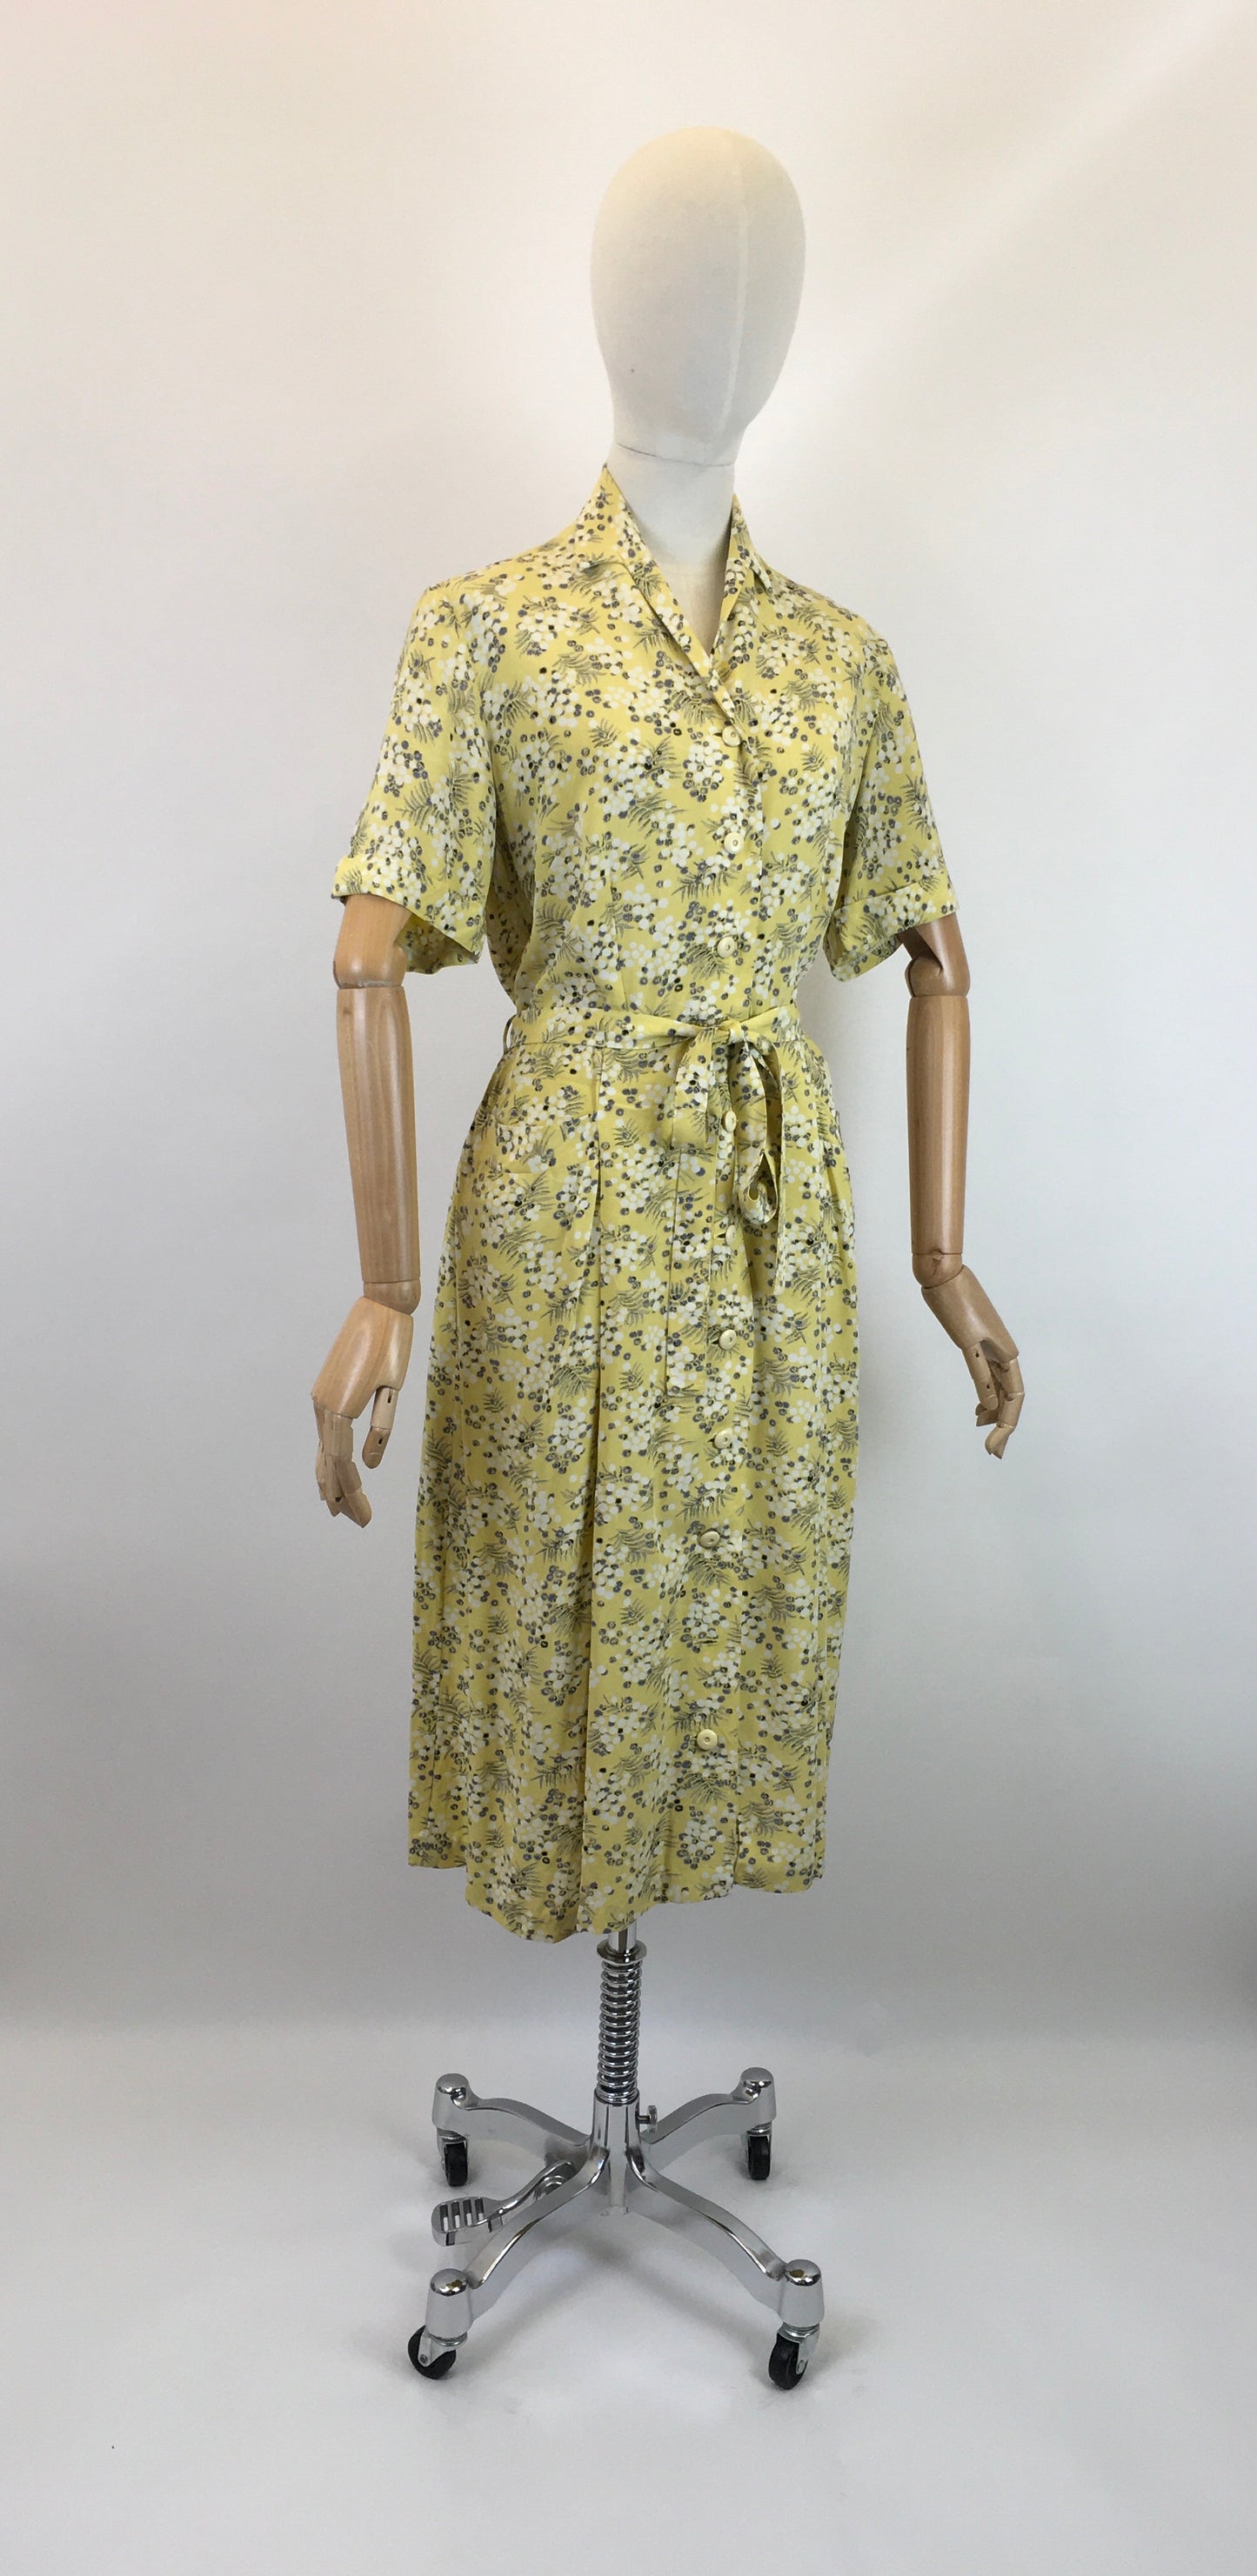 Original 1940’s Darling Floppy Cotton Day Dress - In Soft Yellow With Hints of Grey, Black and White in Floral